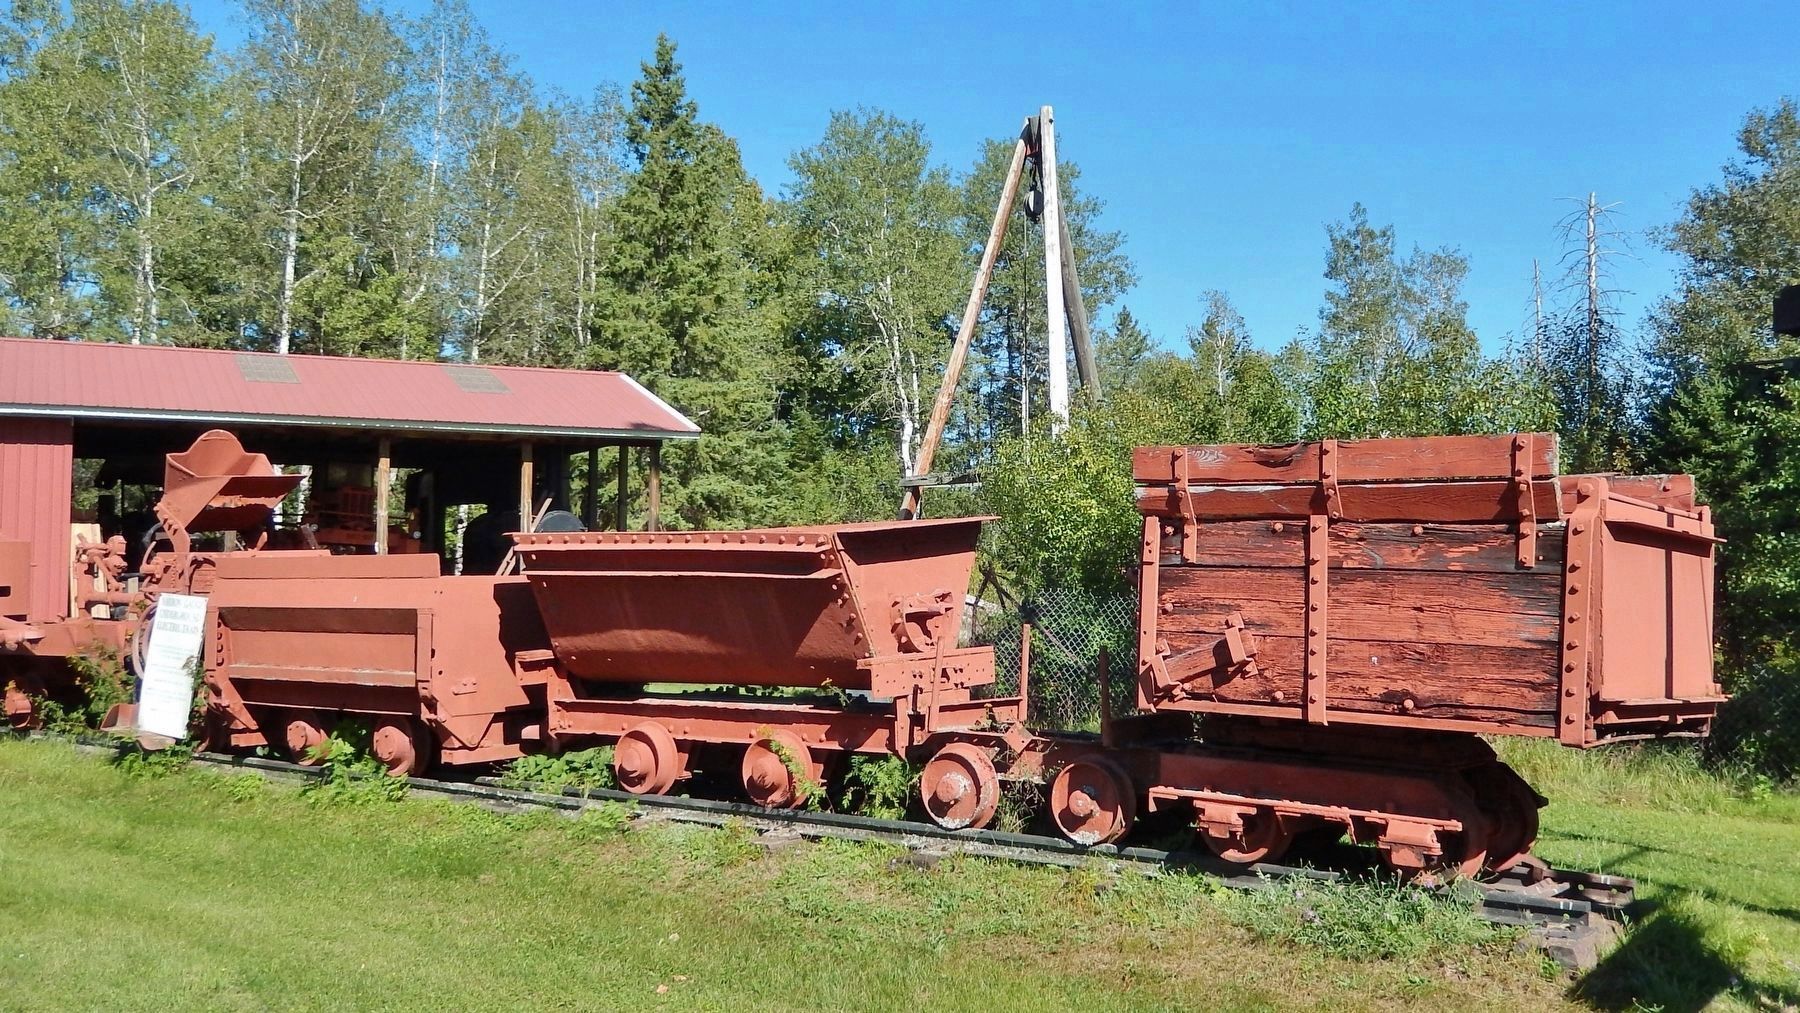 Rocker Arm, Side Dump, Hand Material, and Wooden Ore Cars image. Click for full size.